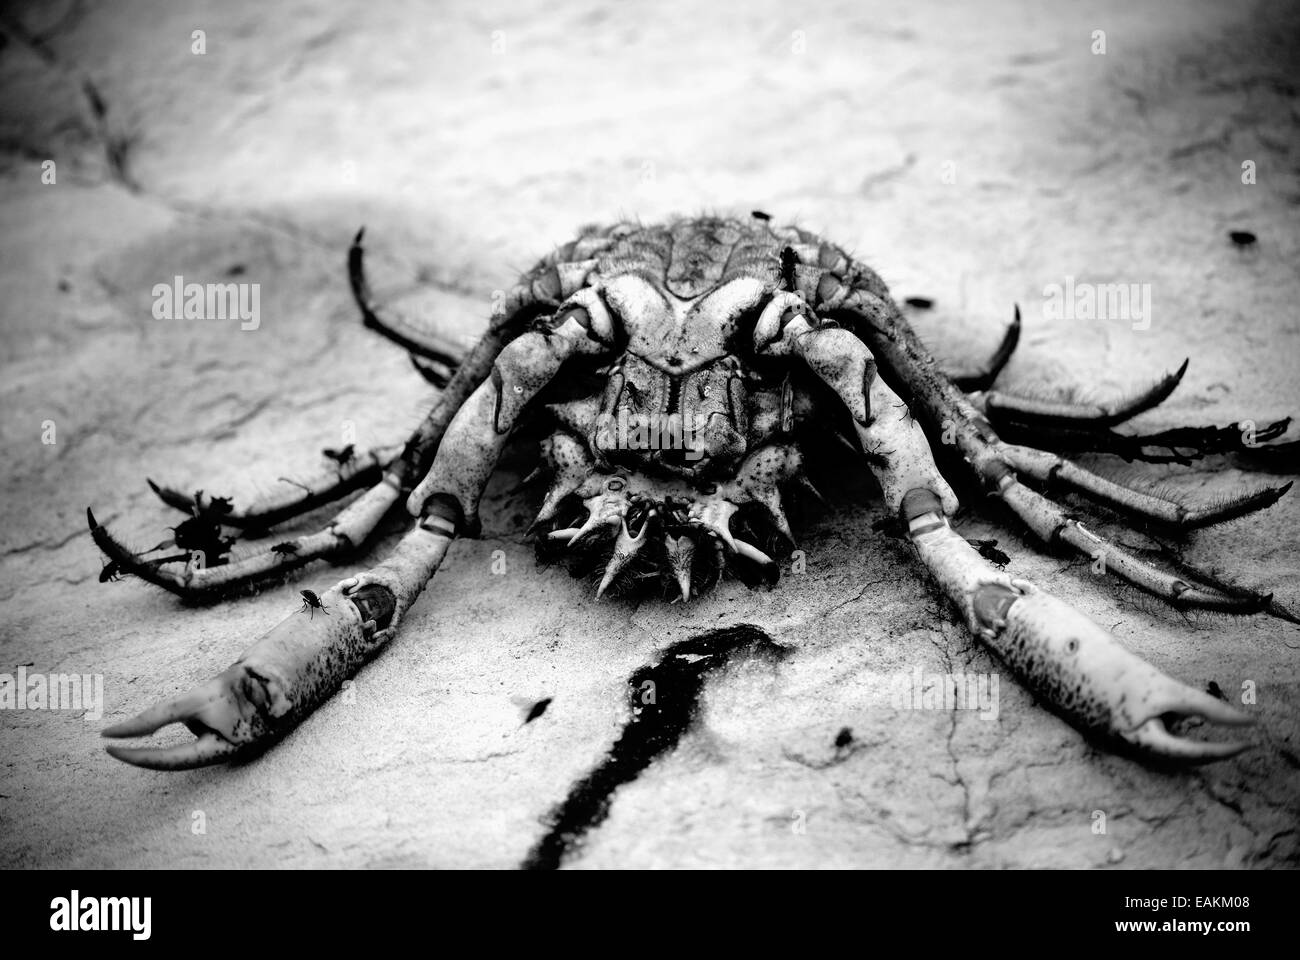 Crab remains laying on the rock. Stock Photo